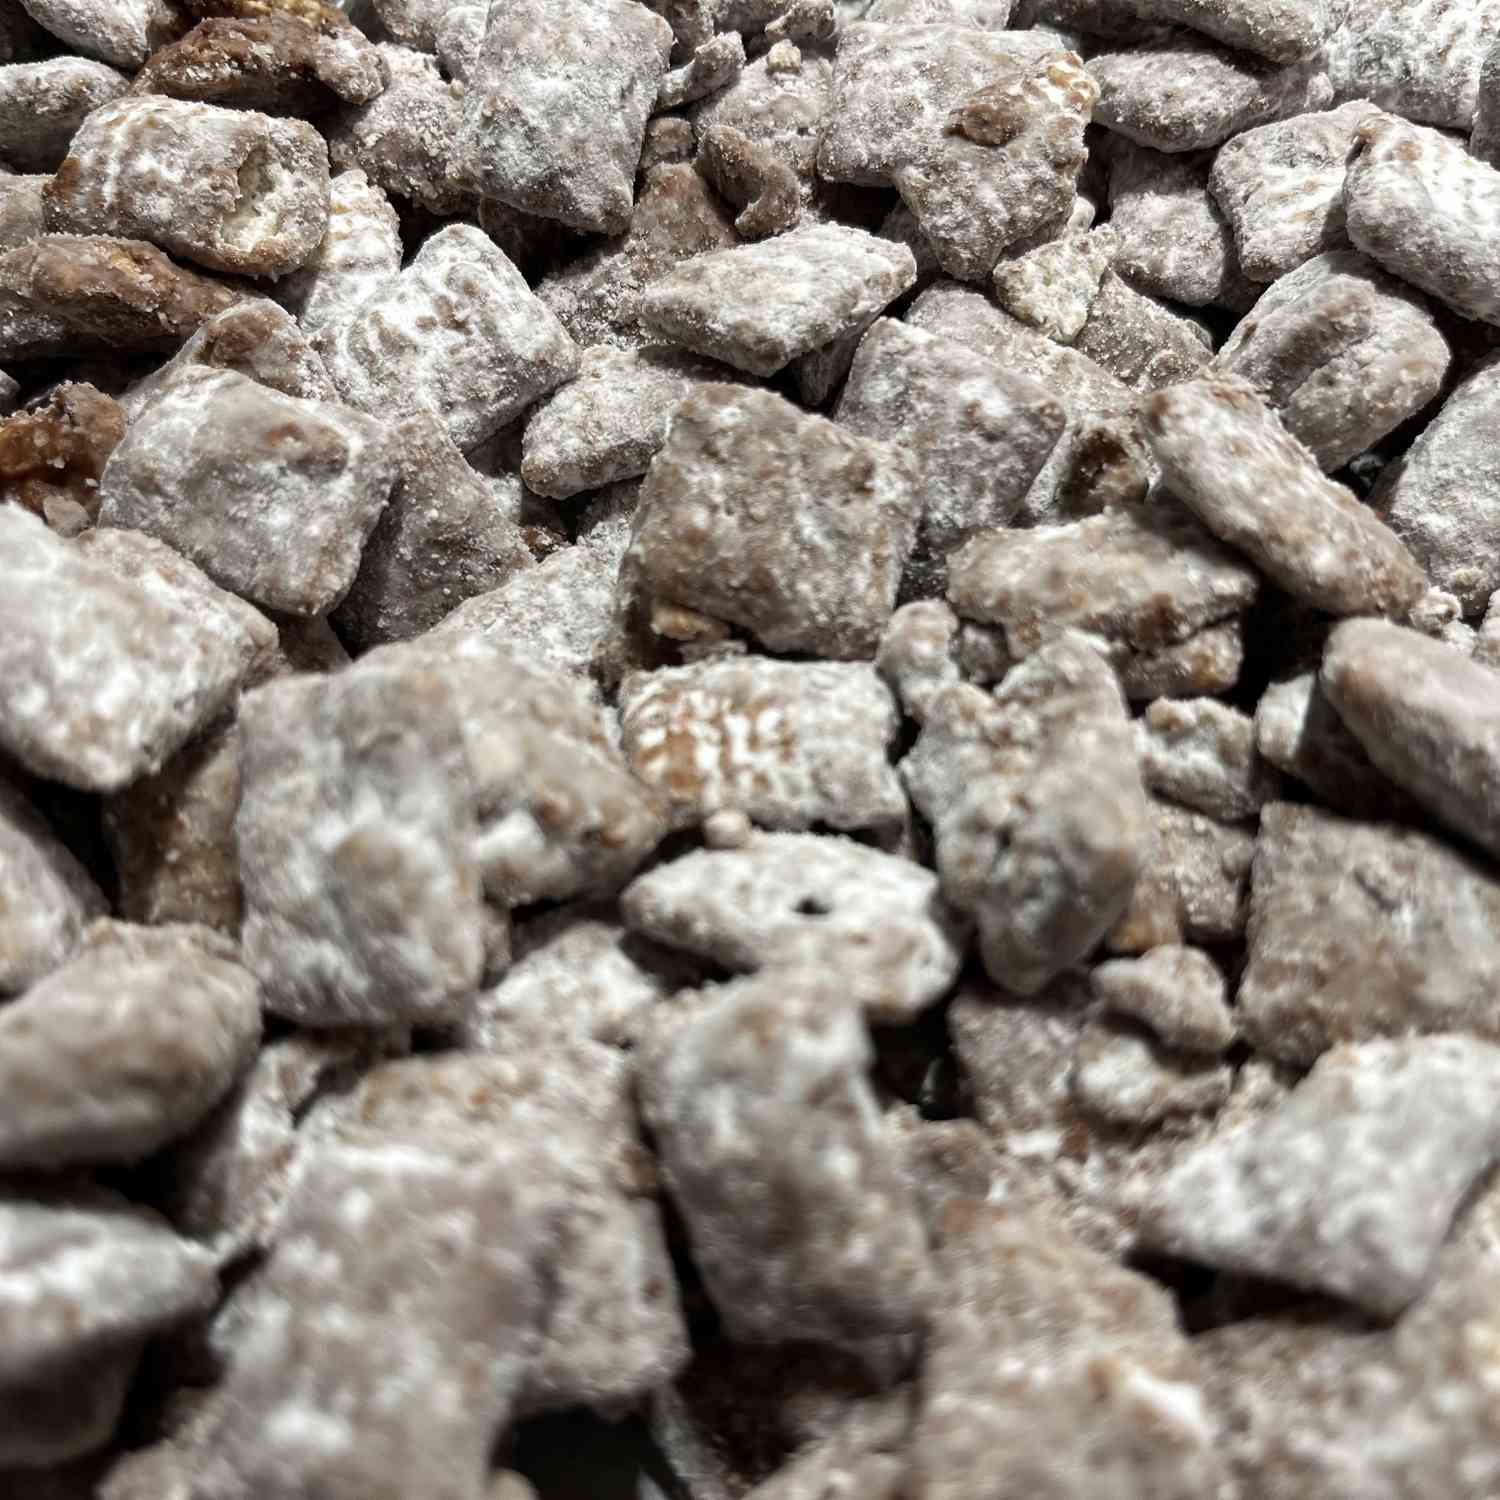 Close up of chocolate and powdered sugar-coated Chex cereal